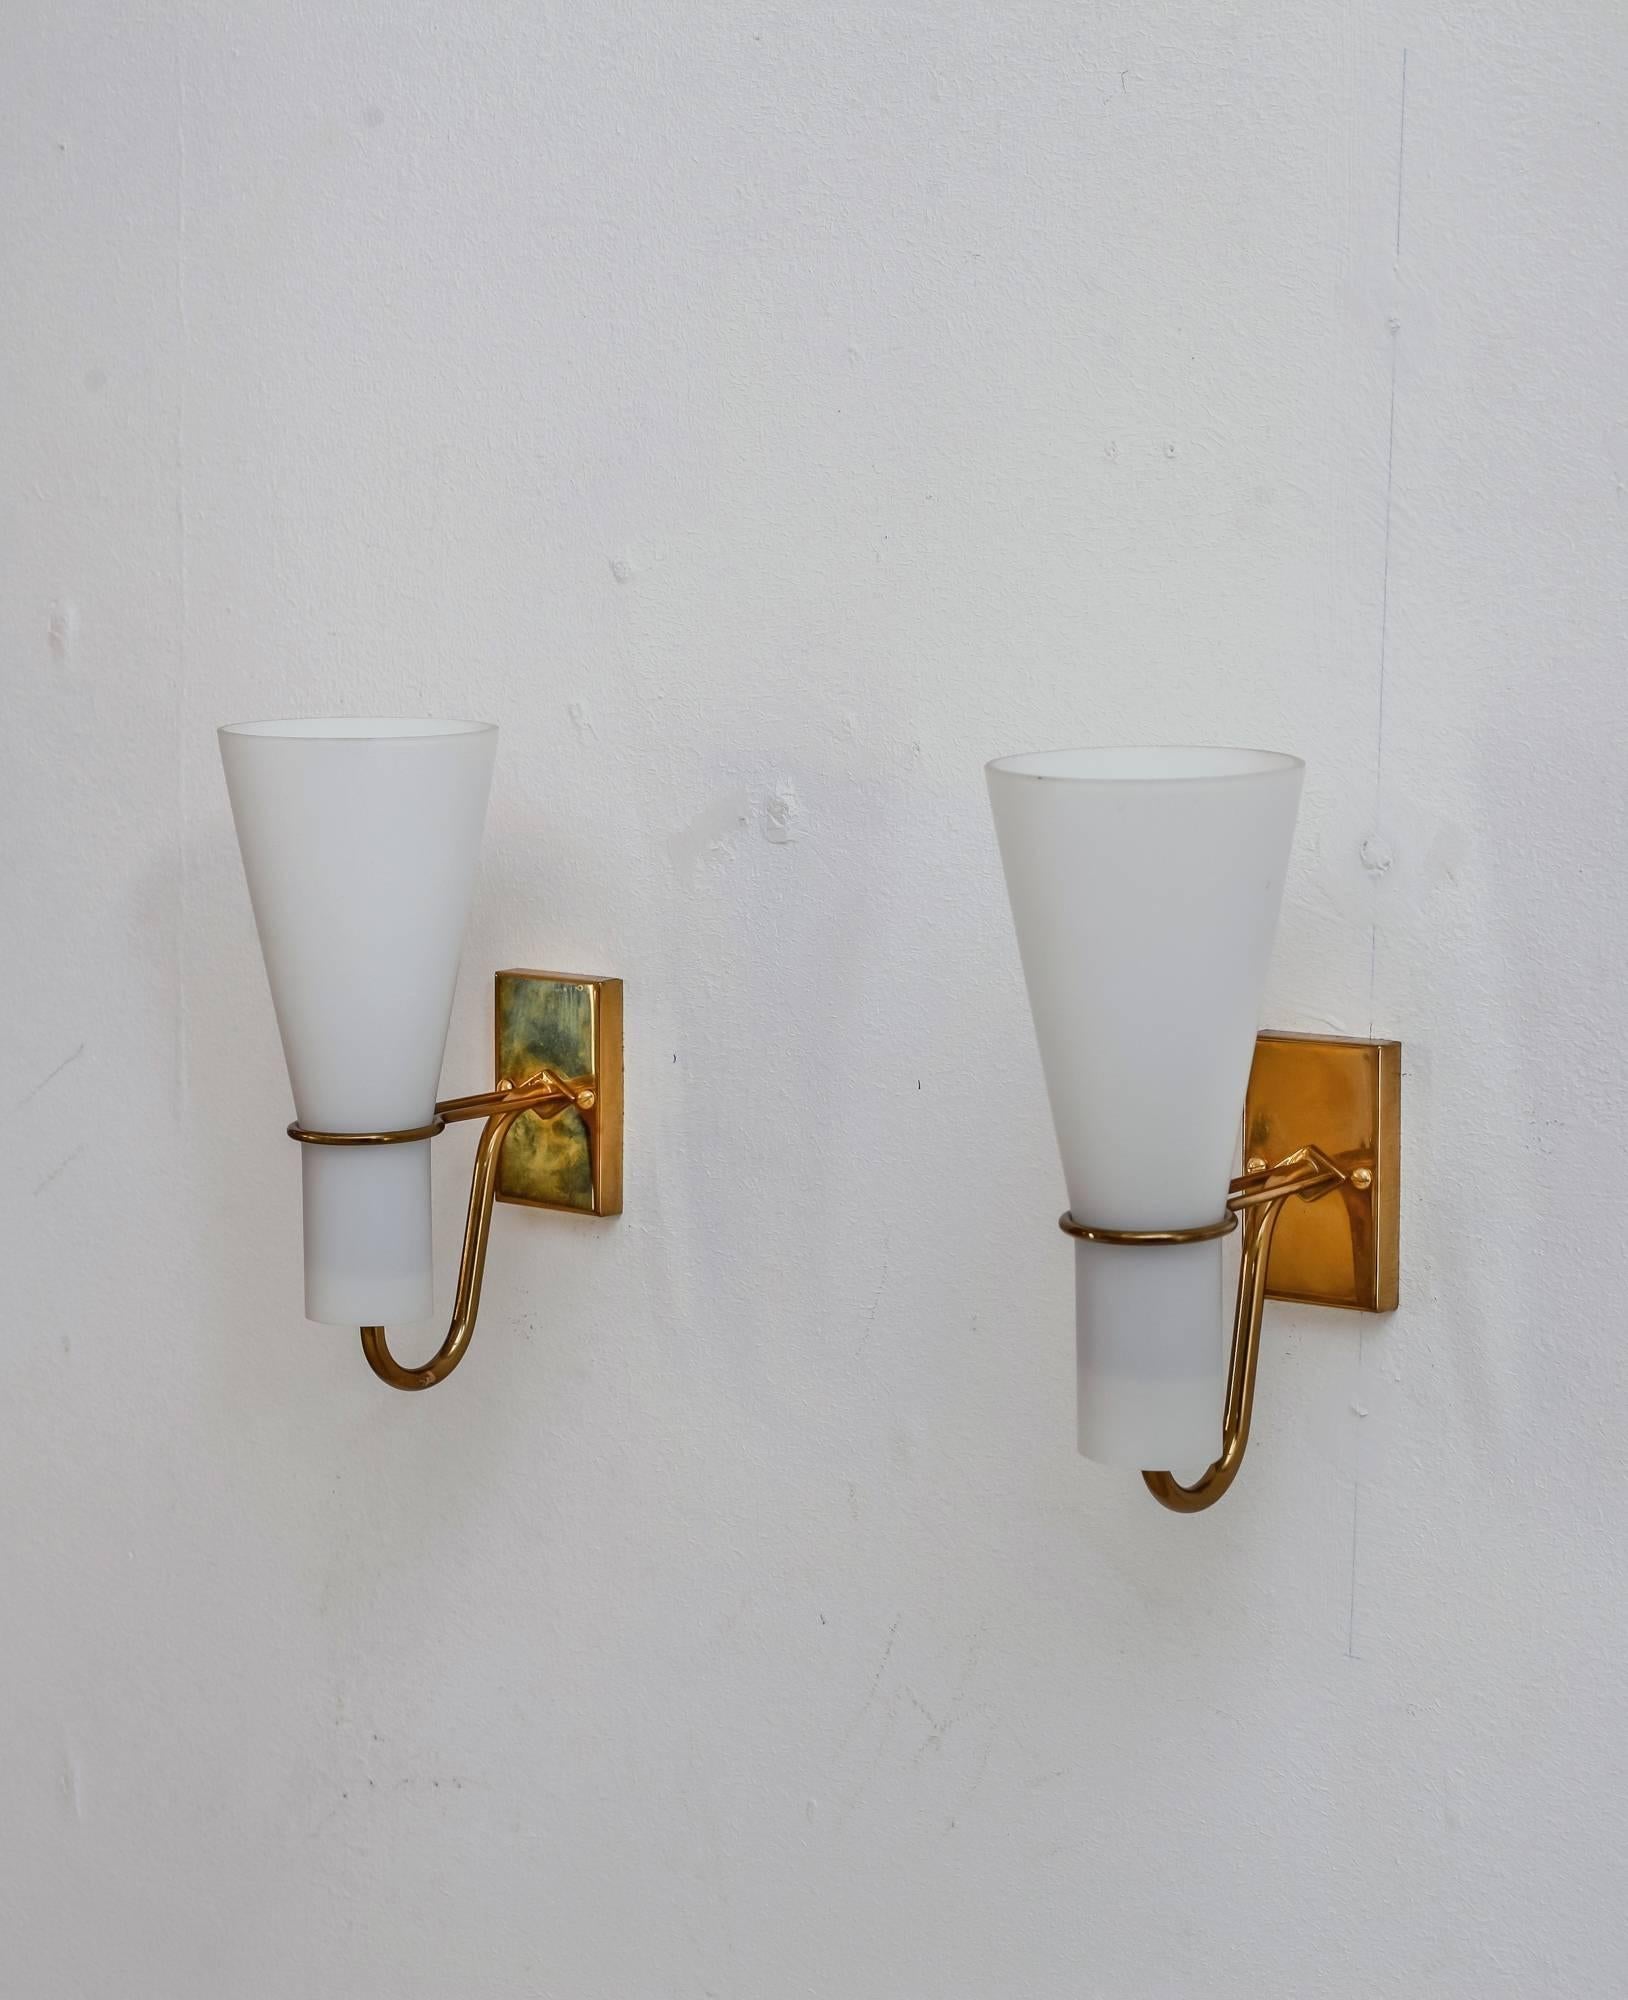 A pair of Asea brass and opaline glass bedside wall lamps. From the wall mount two arms extend that hold a trumpet shaped diffuser. 
One of the lamps is labeled by Asea and both lamps are in a perfect condition.